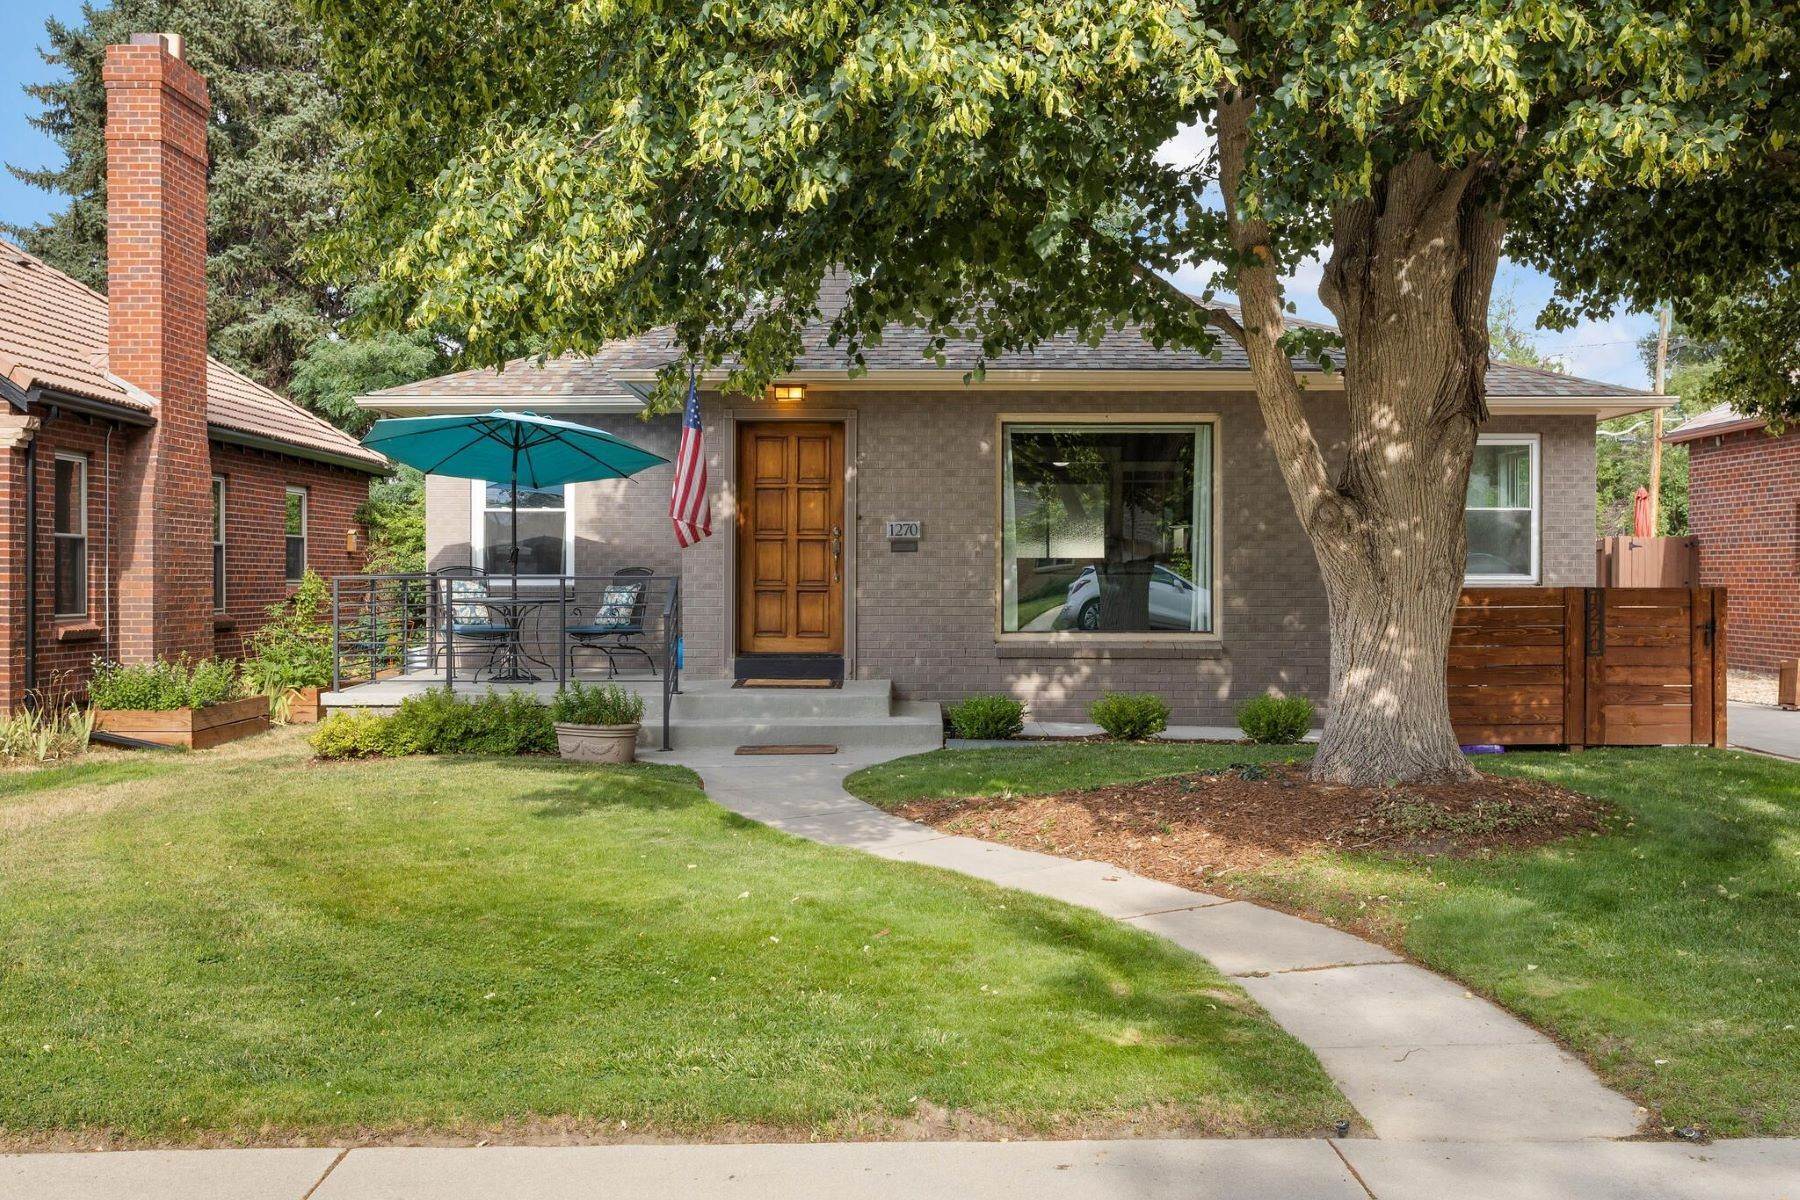 Single Family Homes for Active at 1270 Jasmine Street, Denver, CO, 80220 1270 Jasmine Street Denver, Colorado 80220 United States